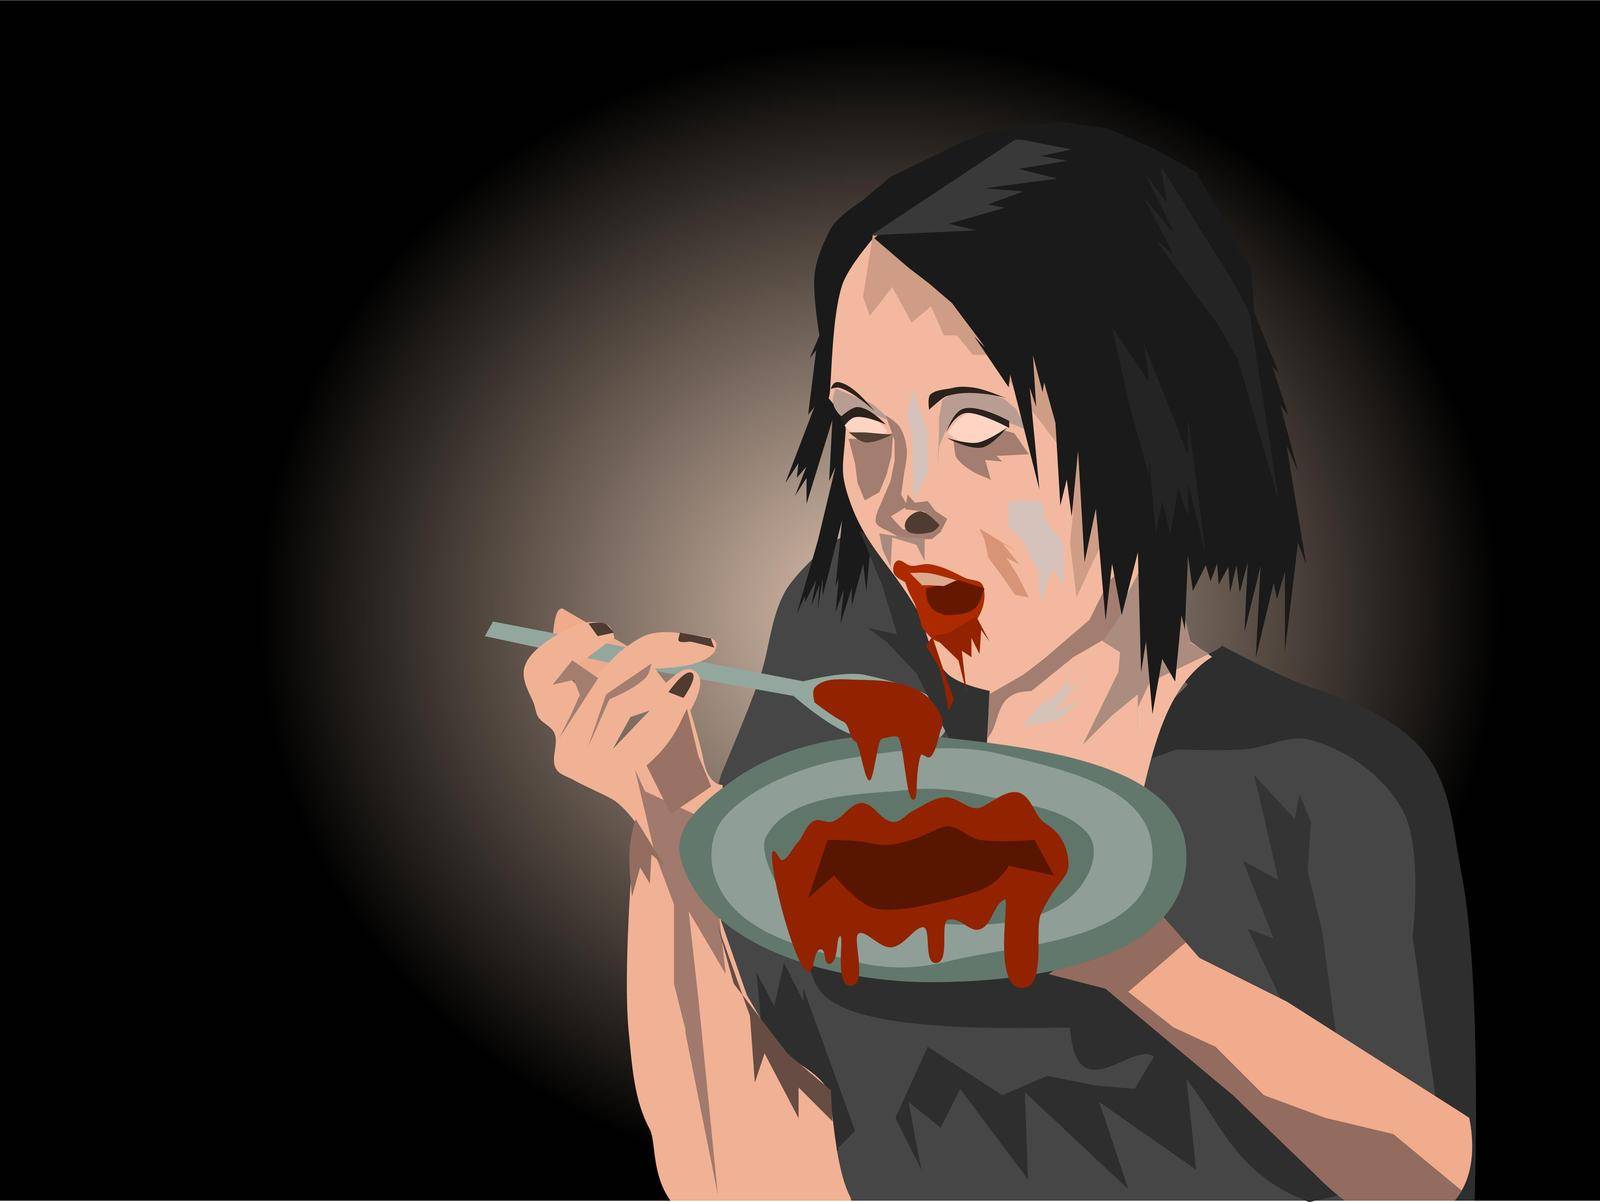 Wicked woman using a spoon to eat blood in a plate with black background. by moo12